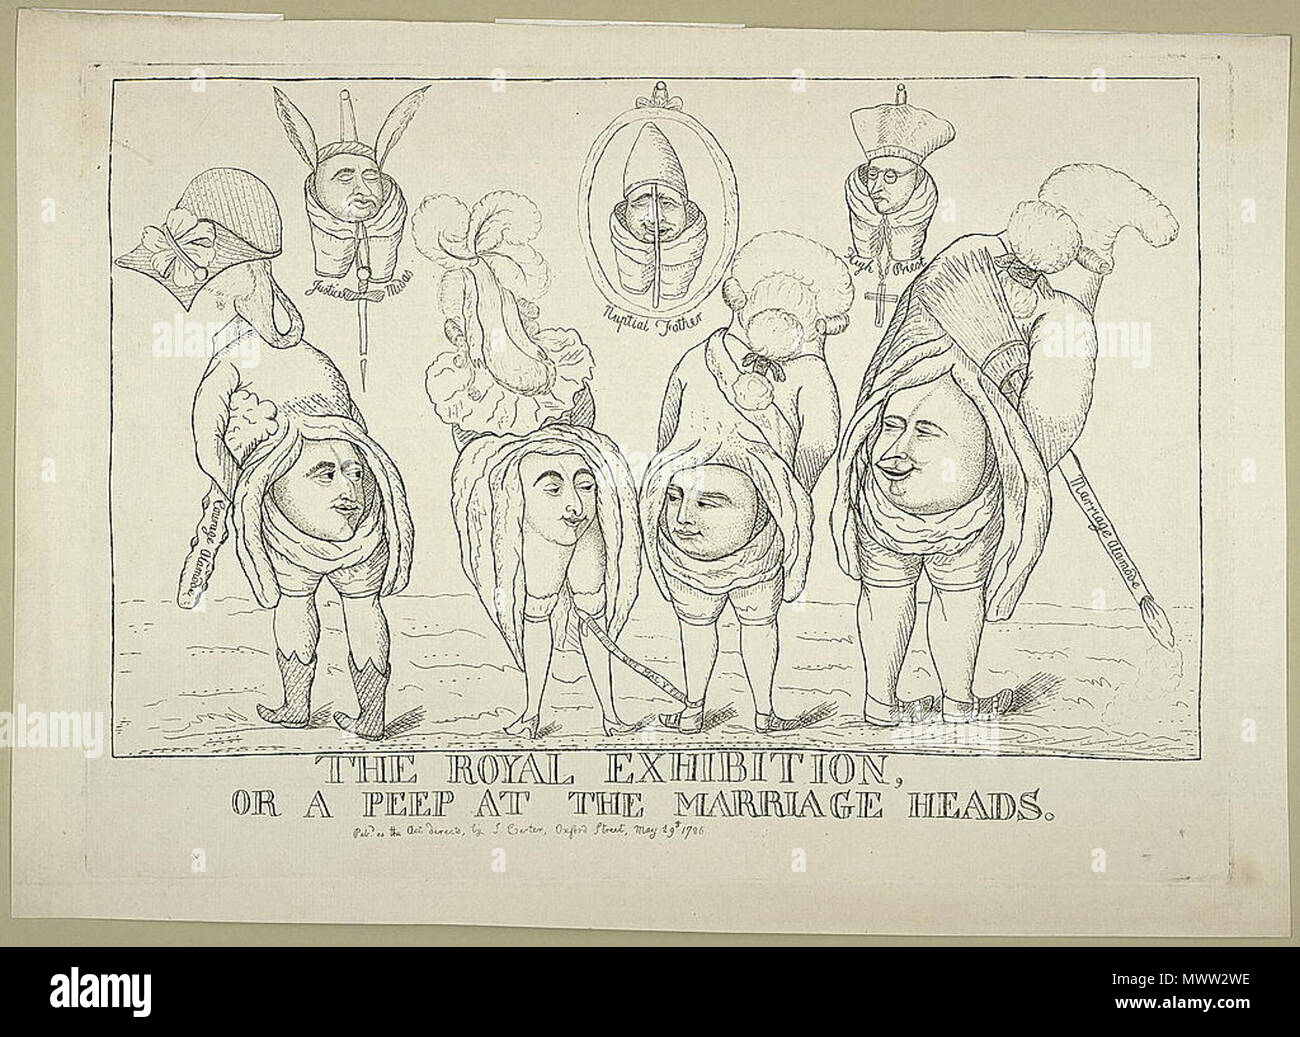 . Print shows a rear view of Maria Anne Fitzherbert and the Prince of Wales as bride and groom, they are connected by a ribbon on which is written 'honi soit qui mal y pense'; two figures, also rear views, look on, 'Courage alamode' from the left and 'Marriage alamode' from the right. Three rear view portraits hang on the wall in the background, from left, 'Justice Midas' with the ears of a donkey, 'Nuptial Father' (the Pope), and as 'High Priest' Edmund Burke. [London] : Pub'd ... by J. Carter, Oxford Street, 1786 May 29th.. Title from item. Paper watermarked: JWhatman. DLC Attributed to Will Stock Photo